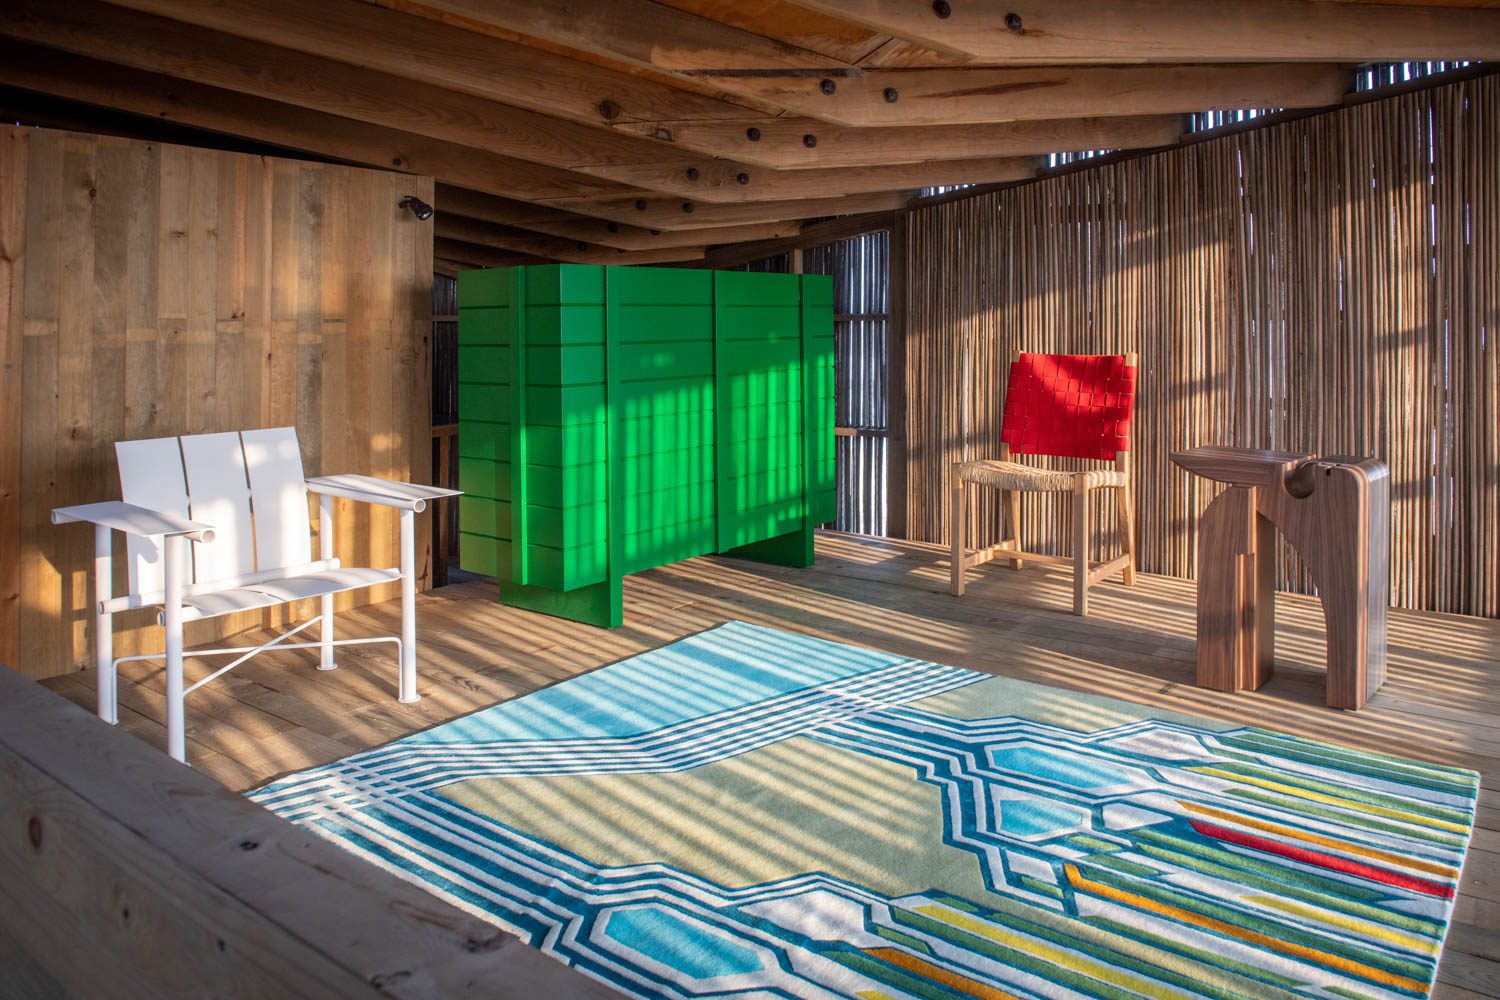 Also inside Casa Naila, its interior wrapped in pine and palm bone, was the white Palma armchair by Marc Morro, the green Redilas I cabinet by Carlos Torre Hütt, the red Arrullo chair by Oscar Hagerman, the Inblock side table by Todomuta Studio, and the Watershed rug by Matali Crasset.